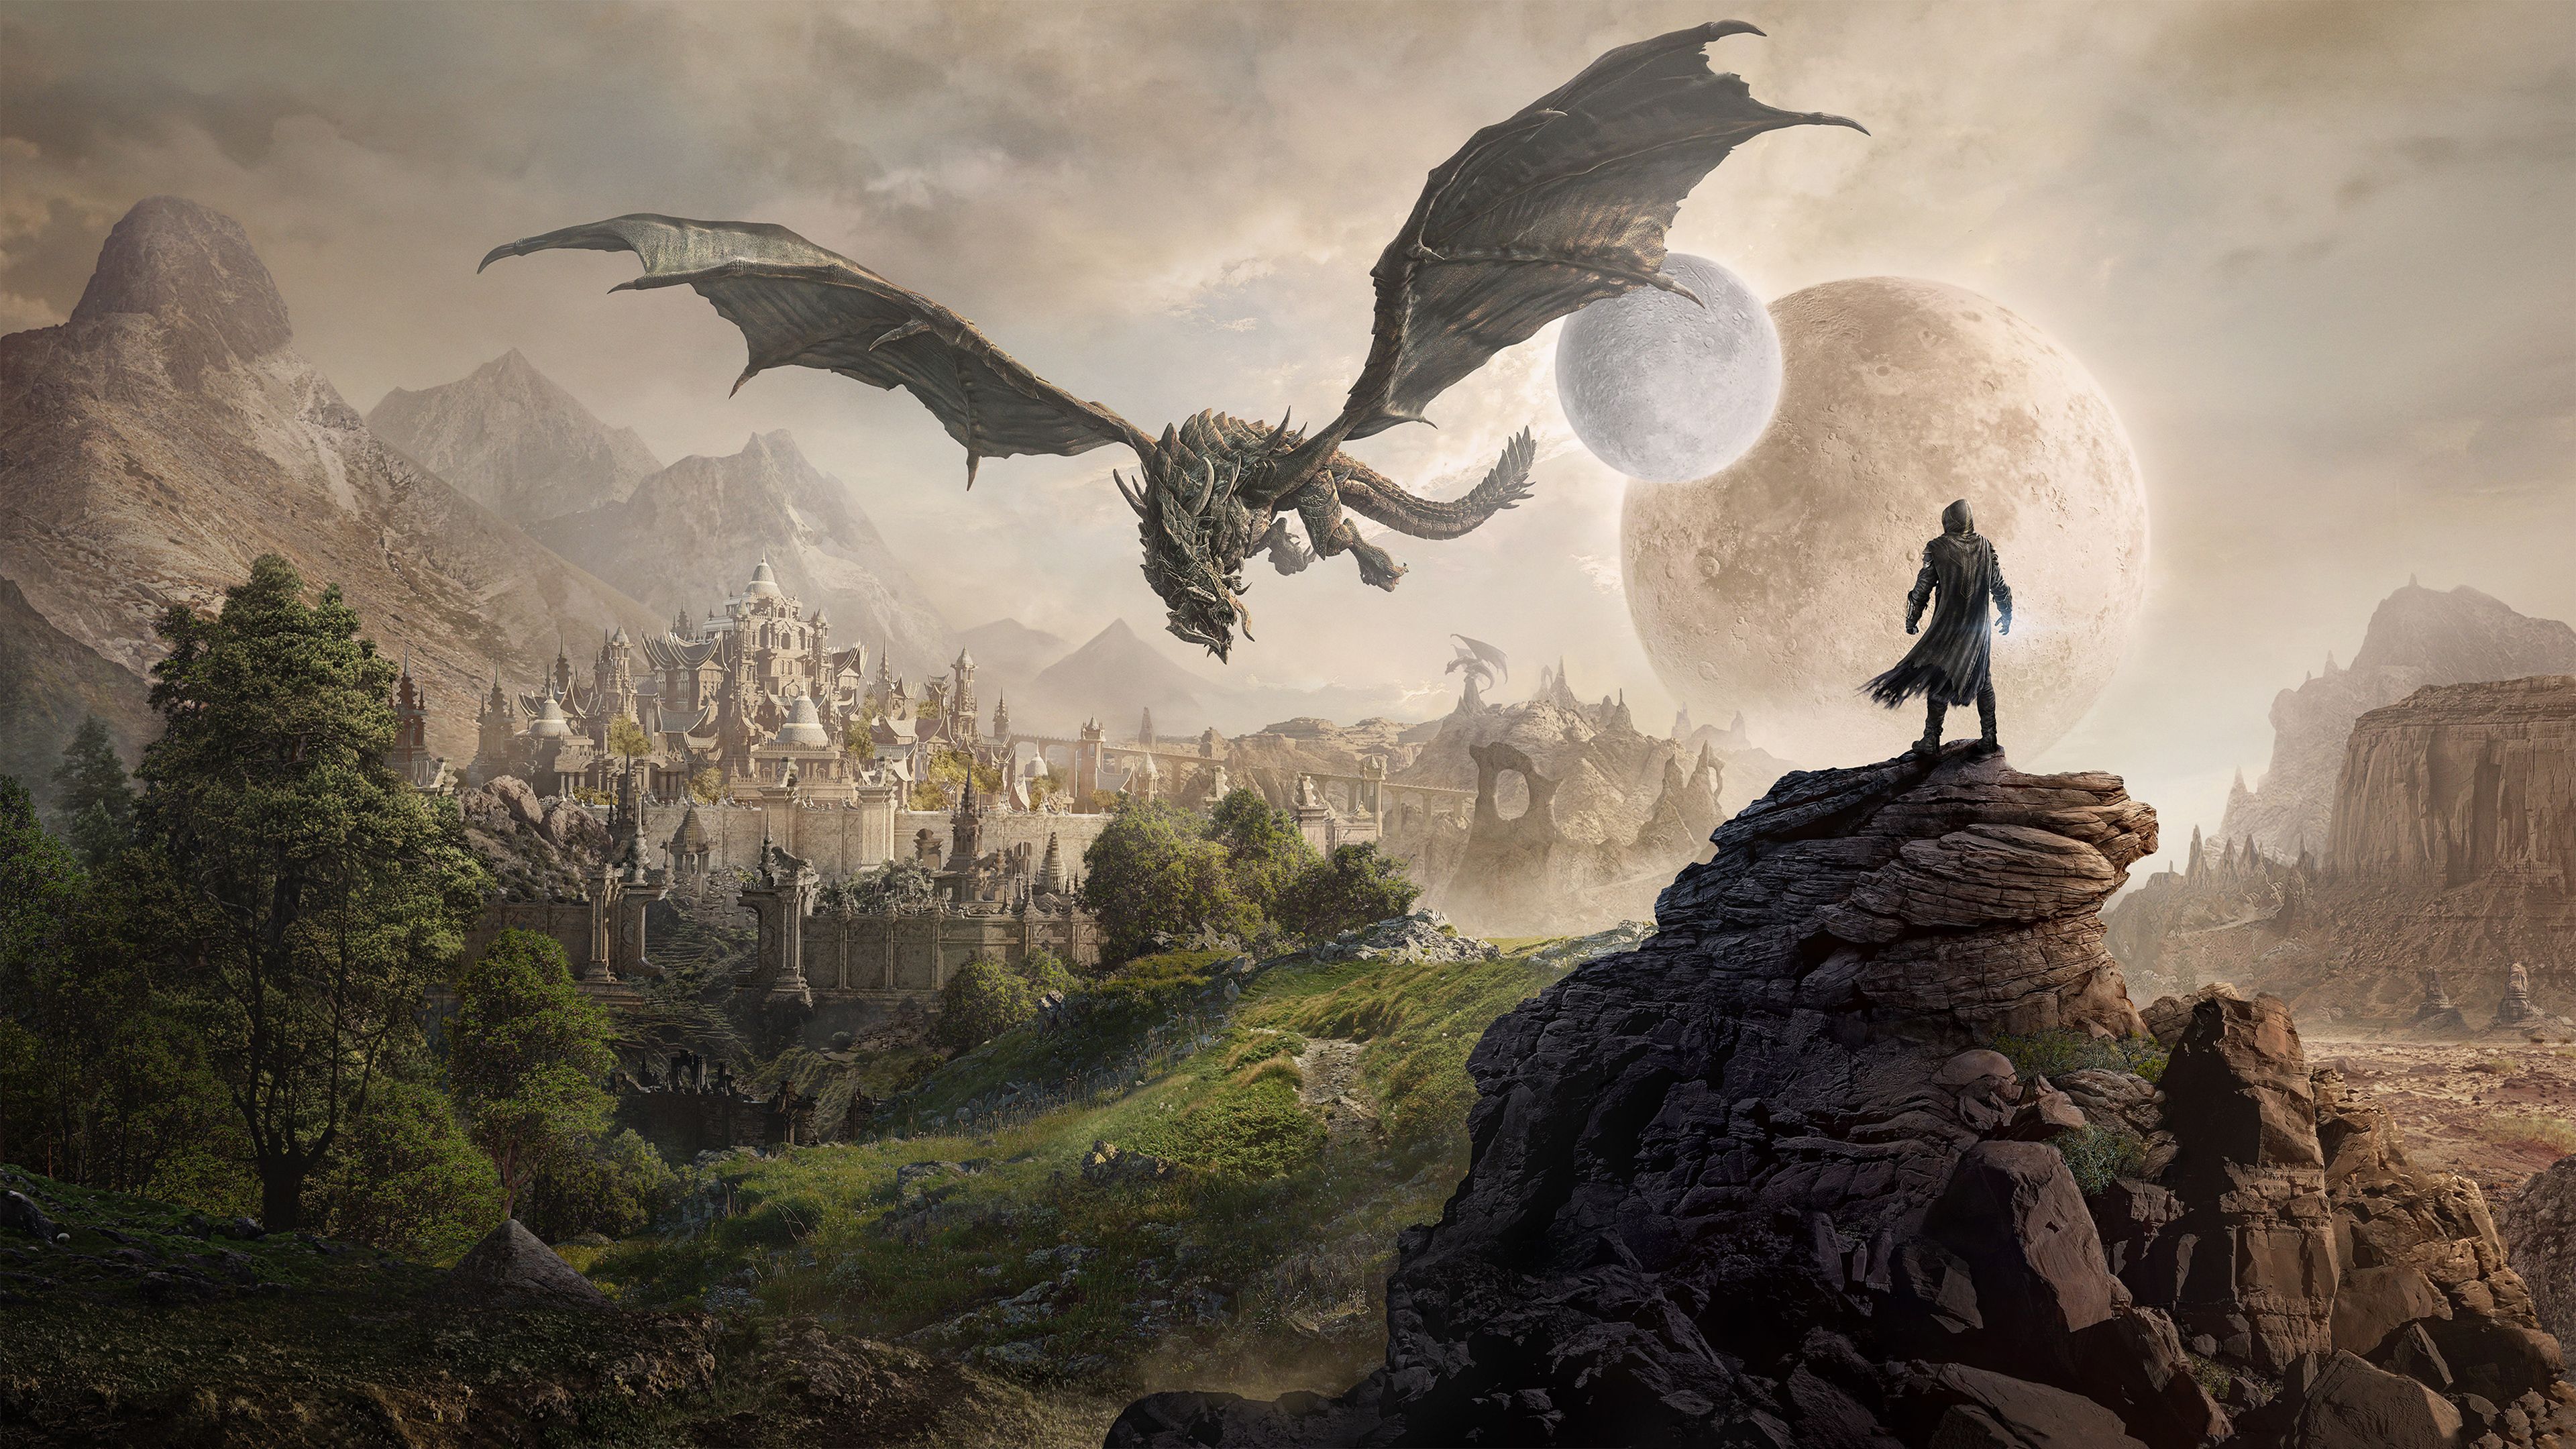 Elsweyr The Elder Scrolls Online 2019 4k, HD Games, 4k Wallpaper, Image, Background, Photo and Picture